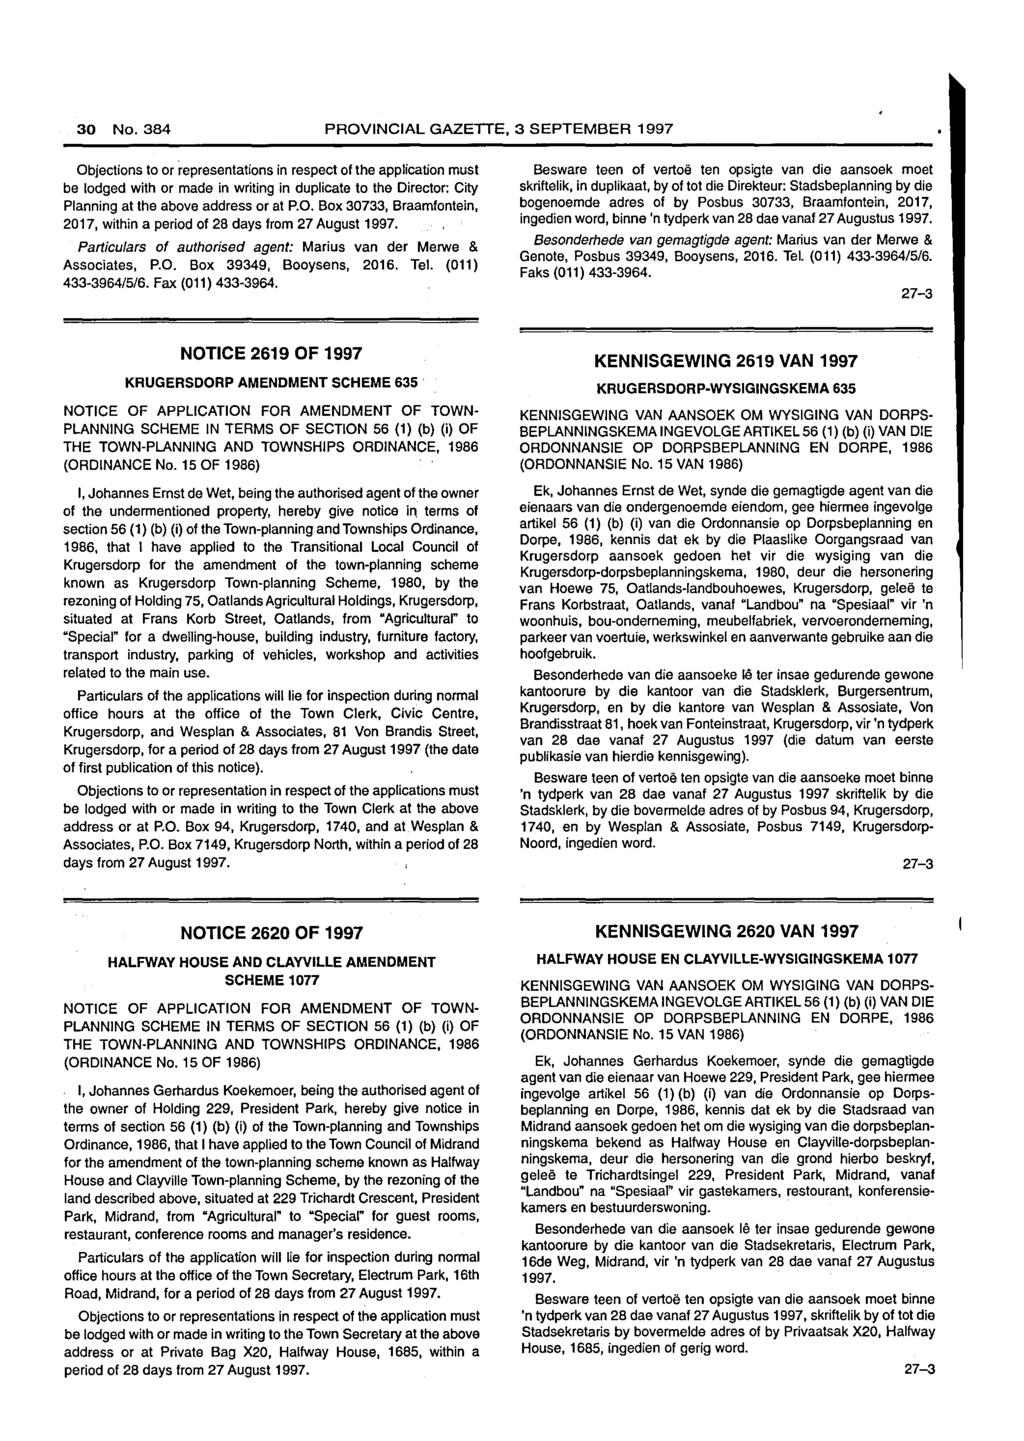 30 No. PROVINCIAL GAZETTE, 3 SEPTEMBER 1997 be lodged with or made in writing in duplicate to the Director: City Planning at the above address or at P.O. Box 30733, Braamfontein, 2017, within a period of 28 days from 27 August 1997.